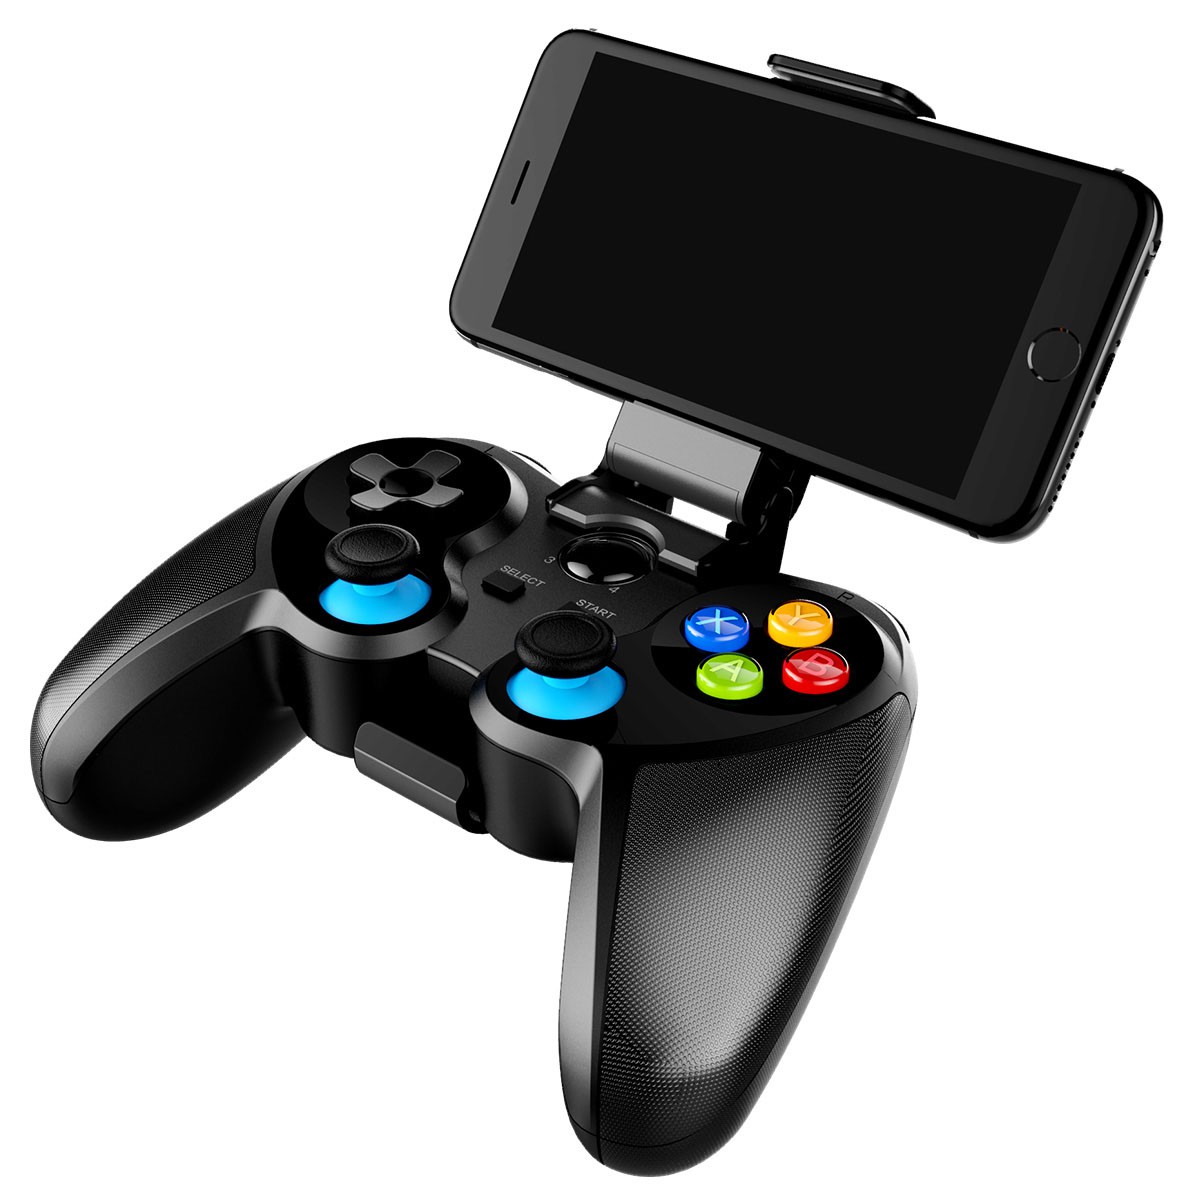 IN STOCK Wireless Bluetooth Gamepad Controller Flexible Joystick with Phone Holder For Android IOS PC TV Box